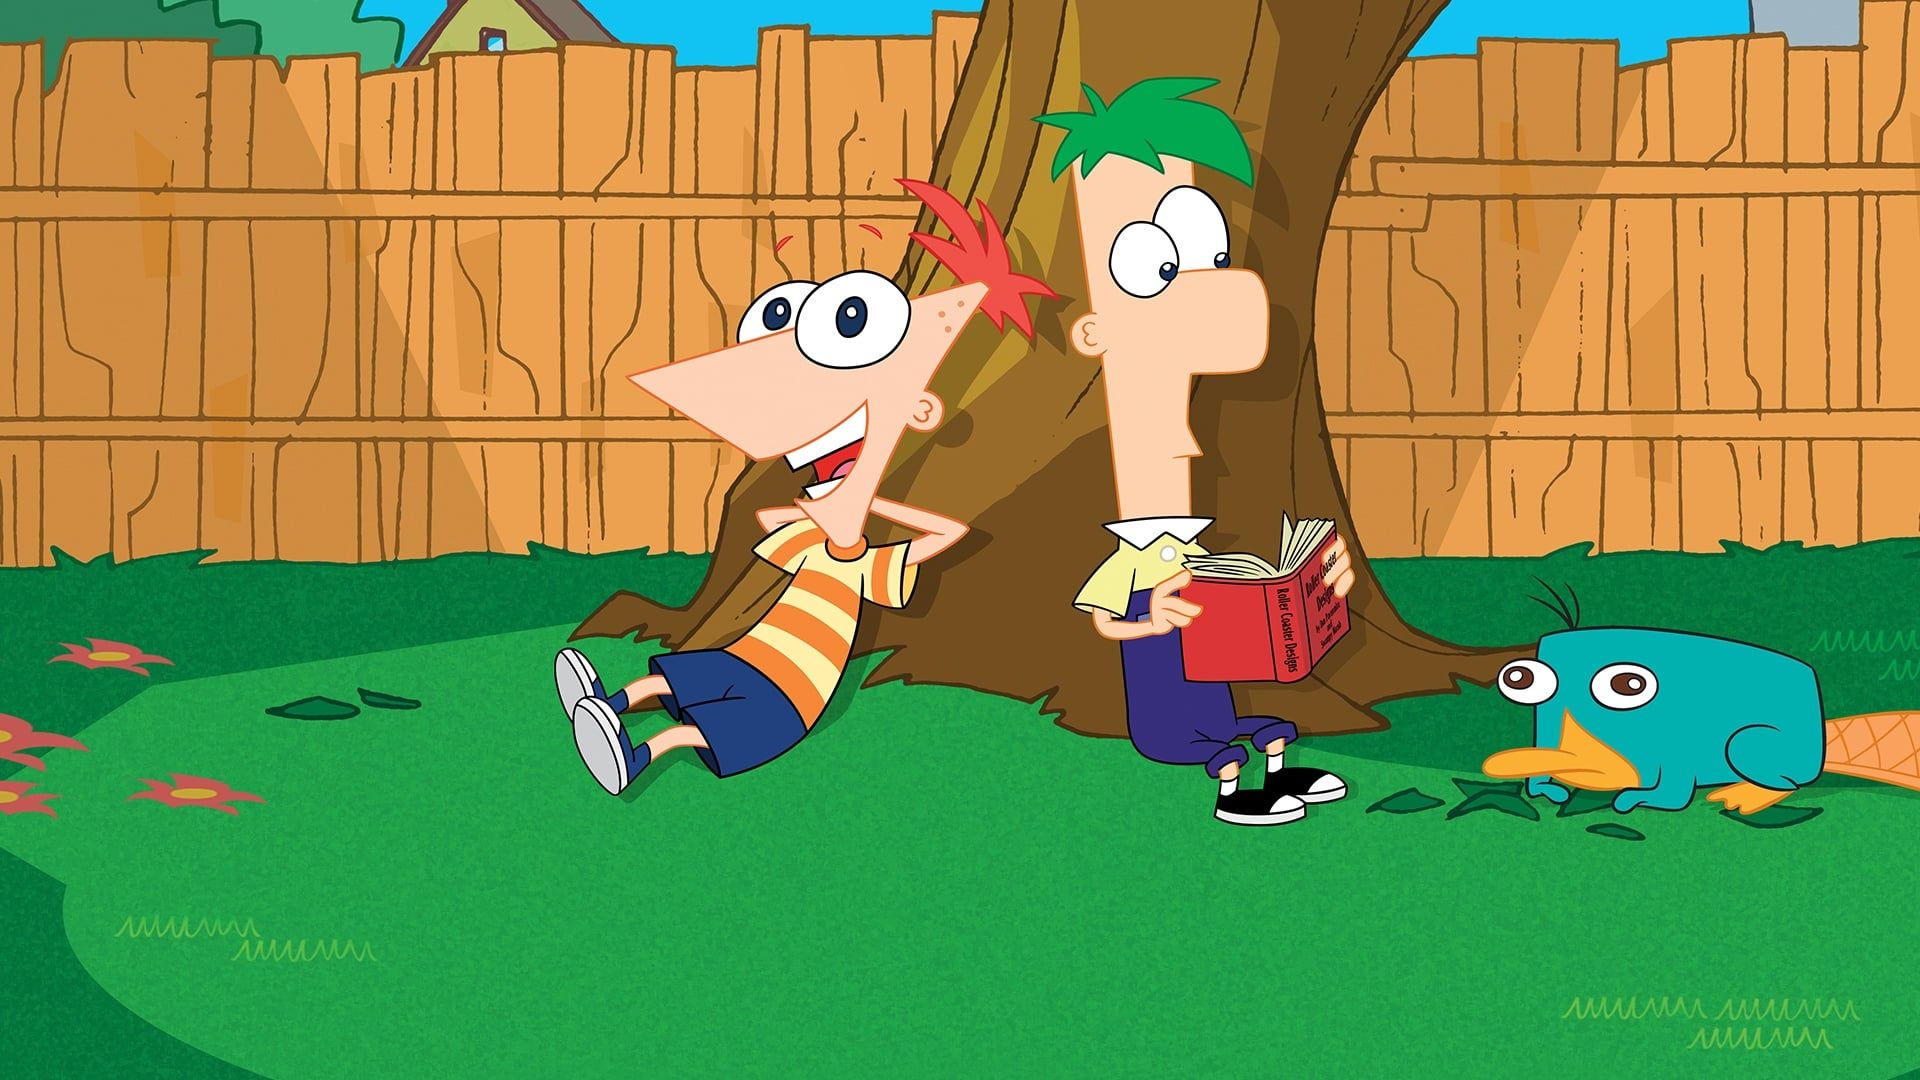 Phineas and Ferb Backdrop